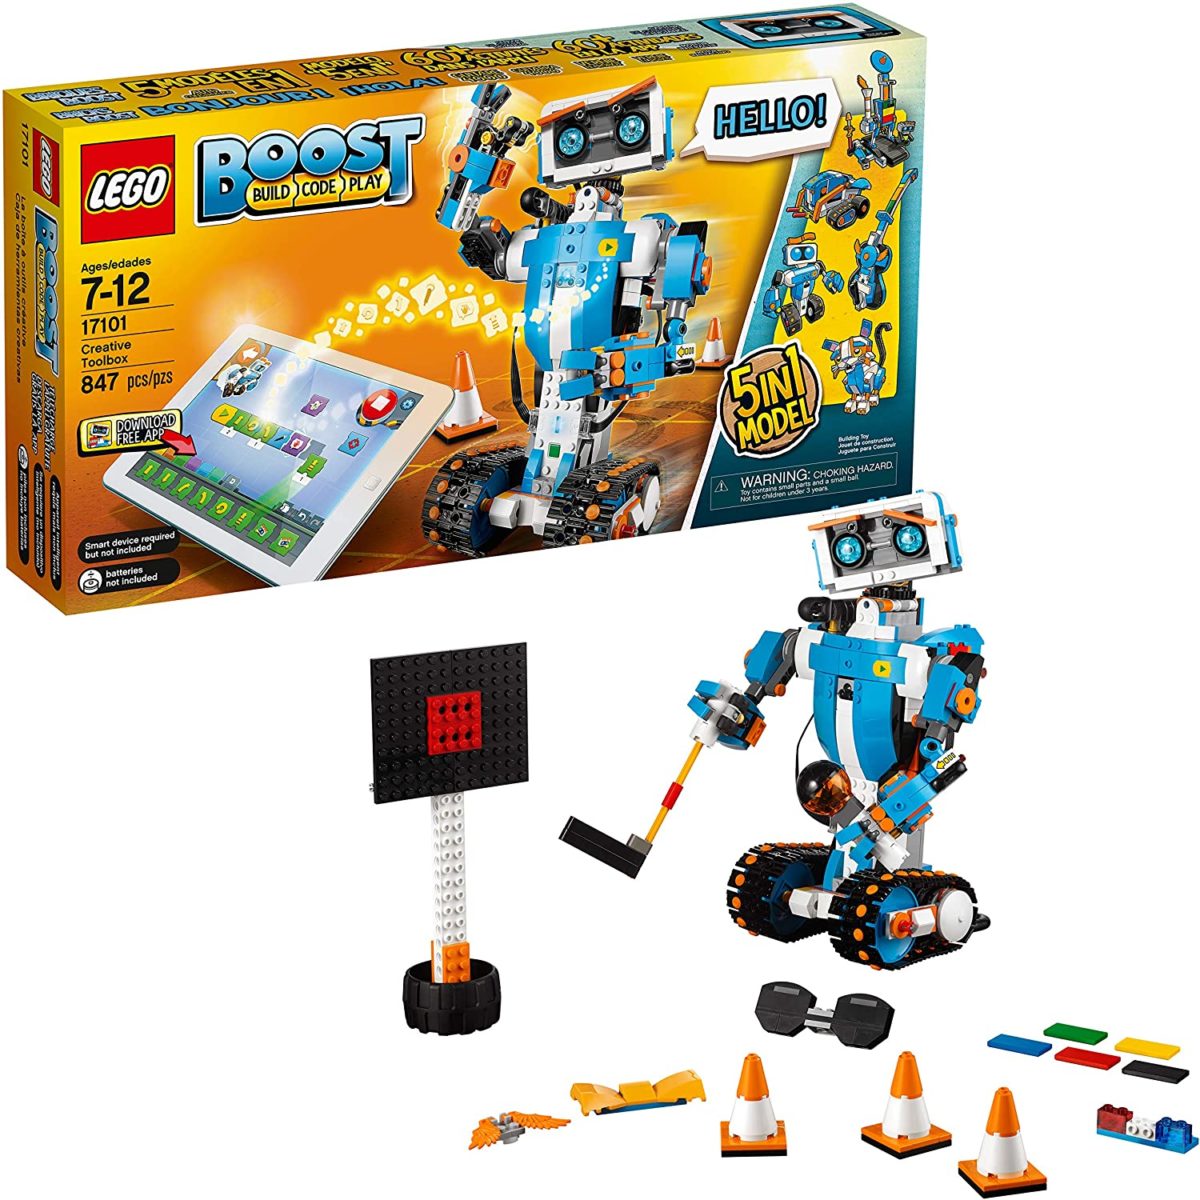 LEGO Boost Creative Toolbox - Top Toys and Gifts for Nine Year Old Boys 1